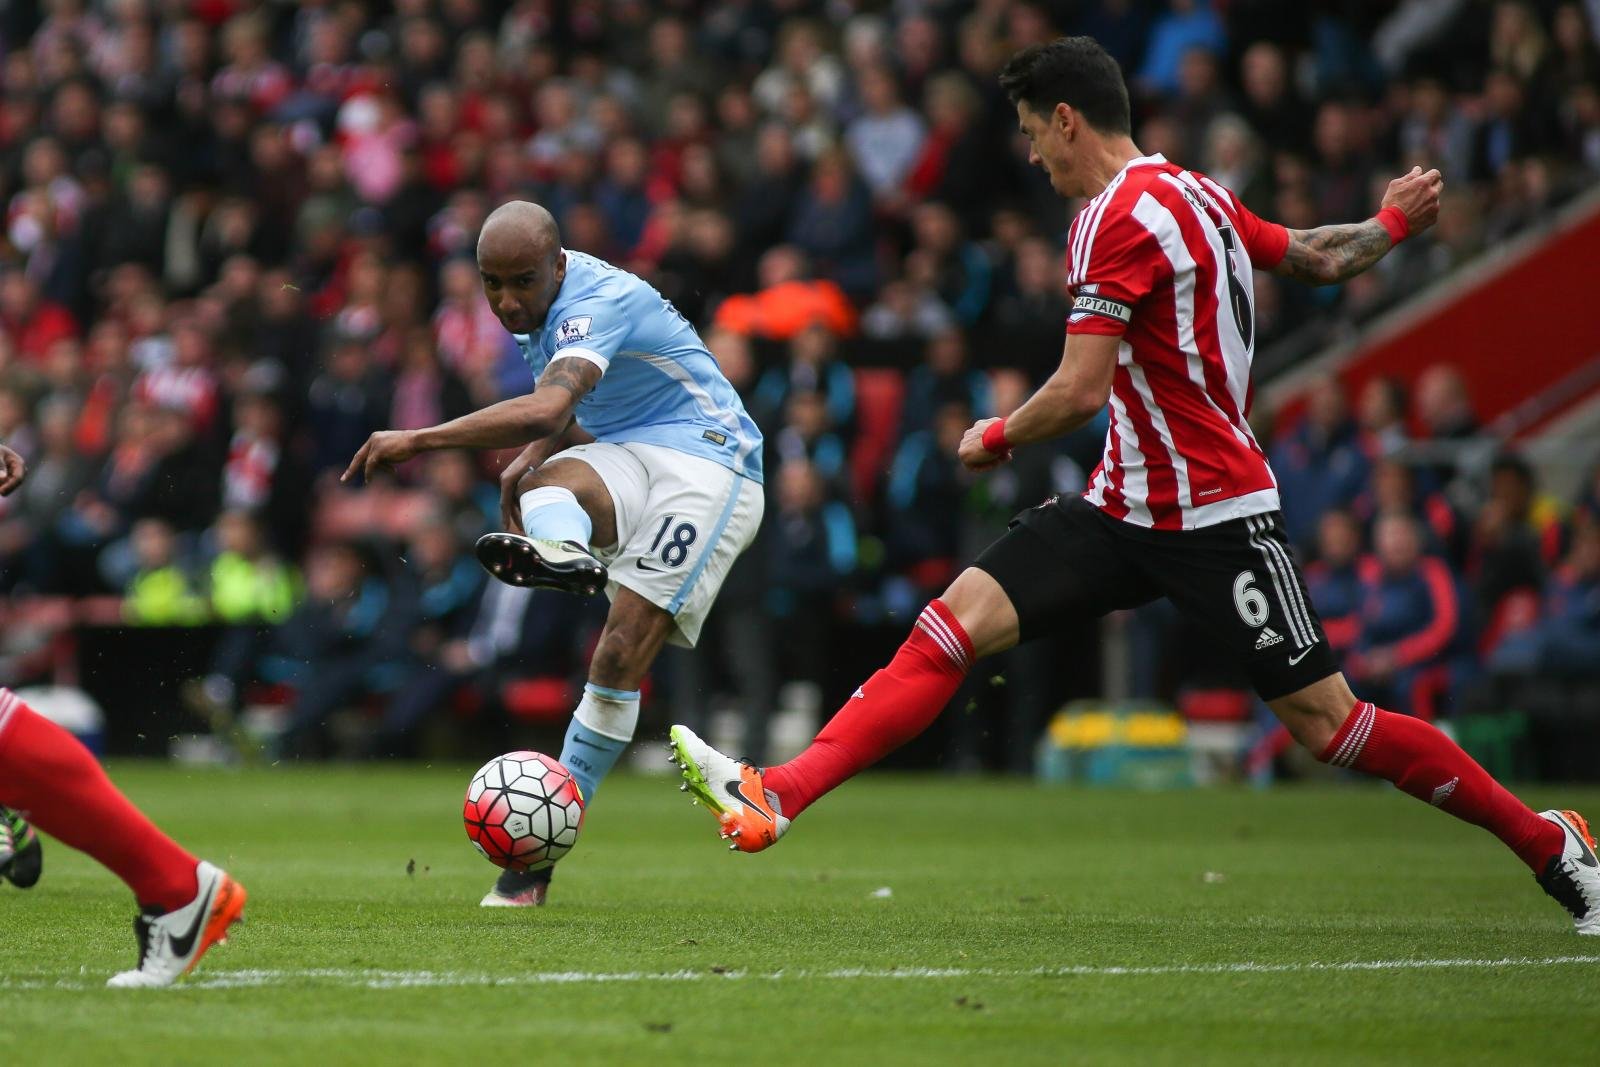 Manchester City considering loan move for Fabian Delph